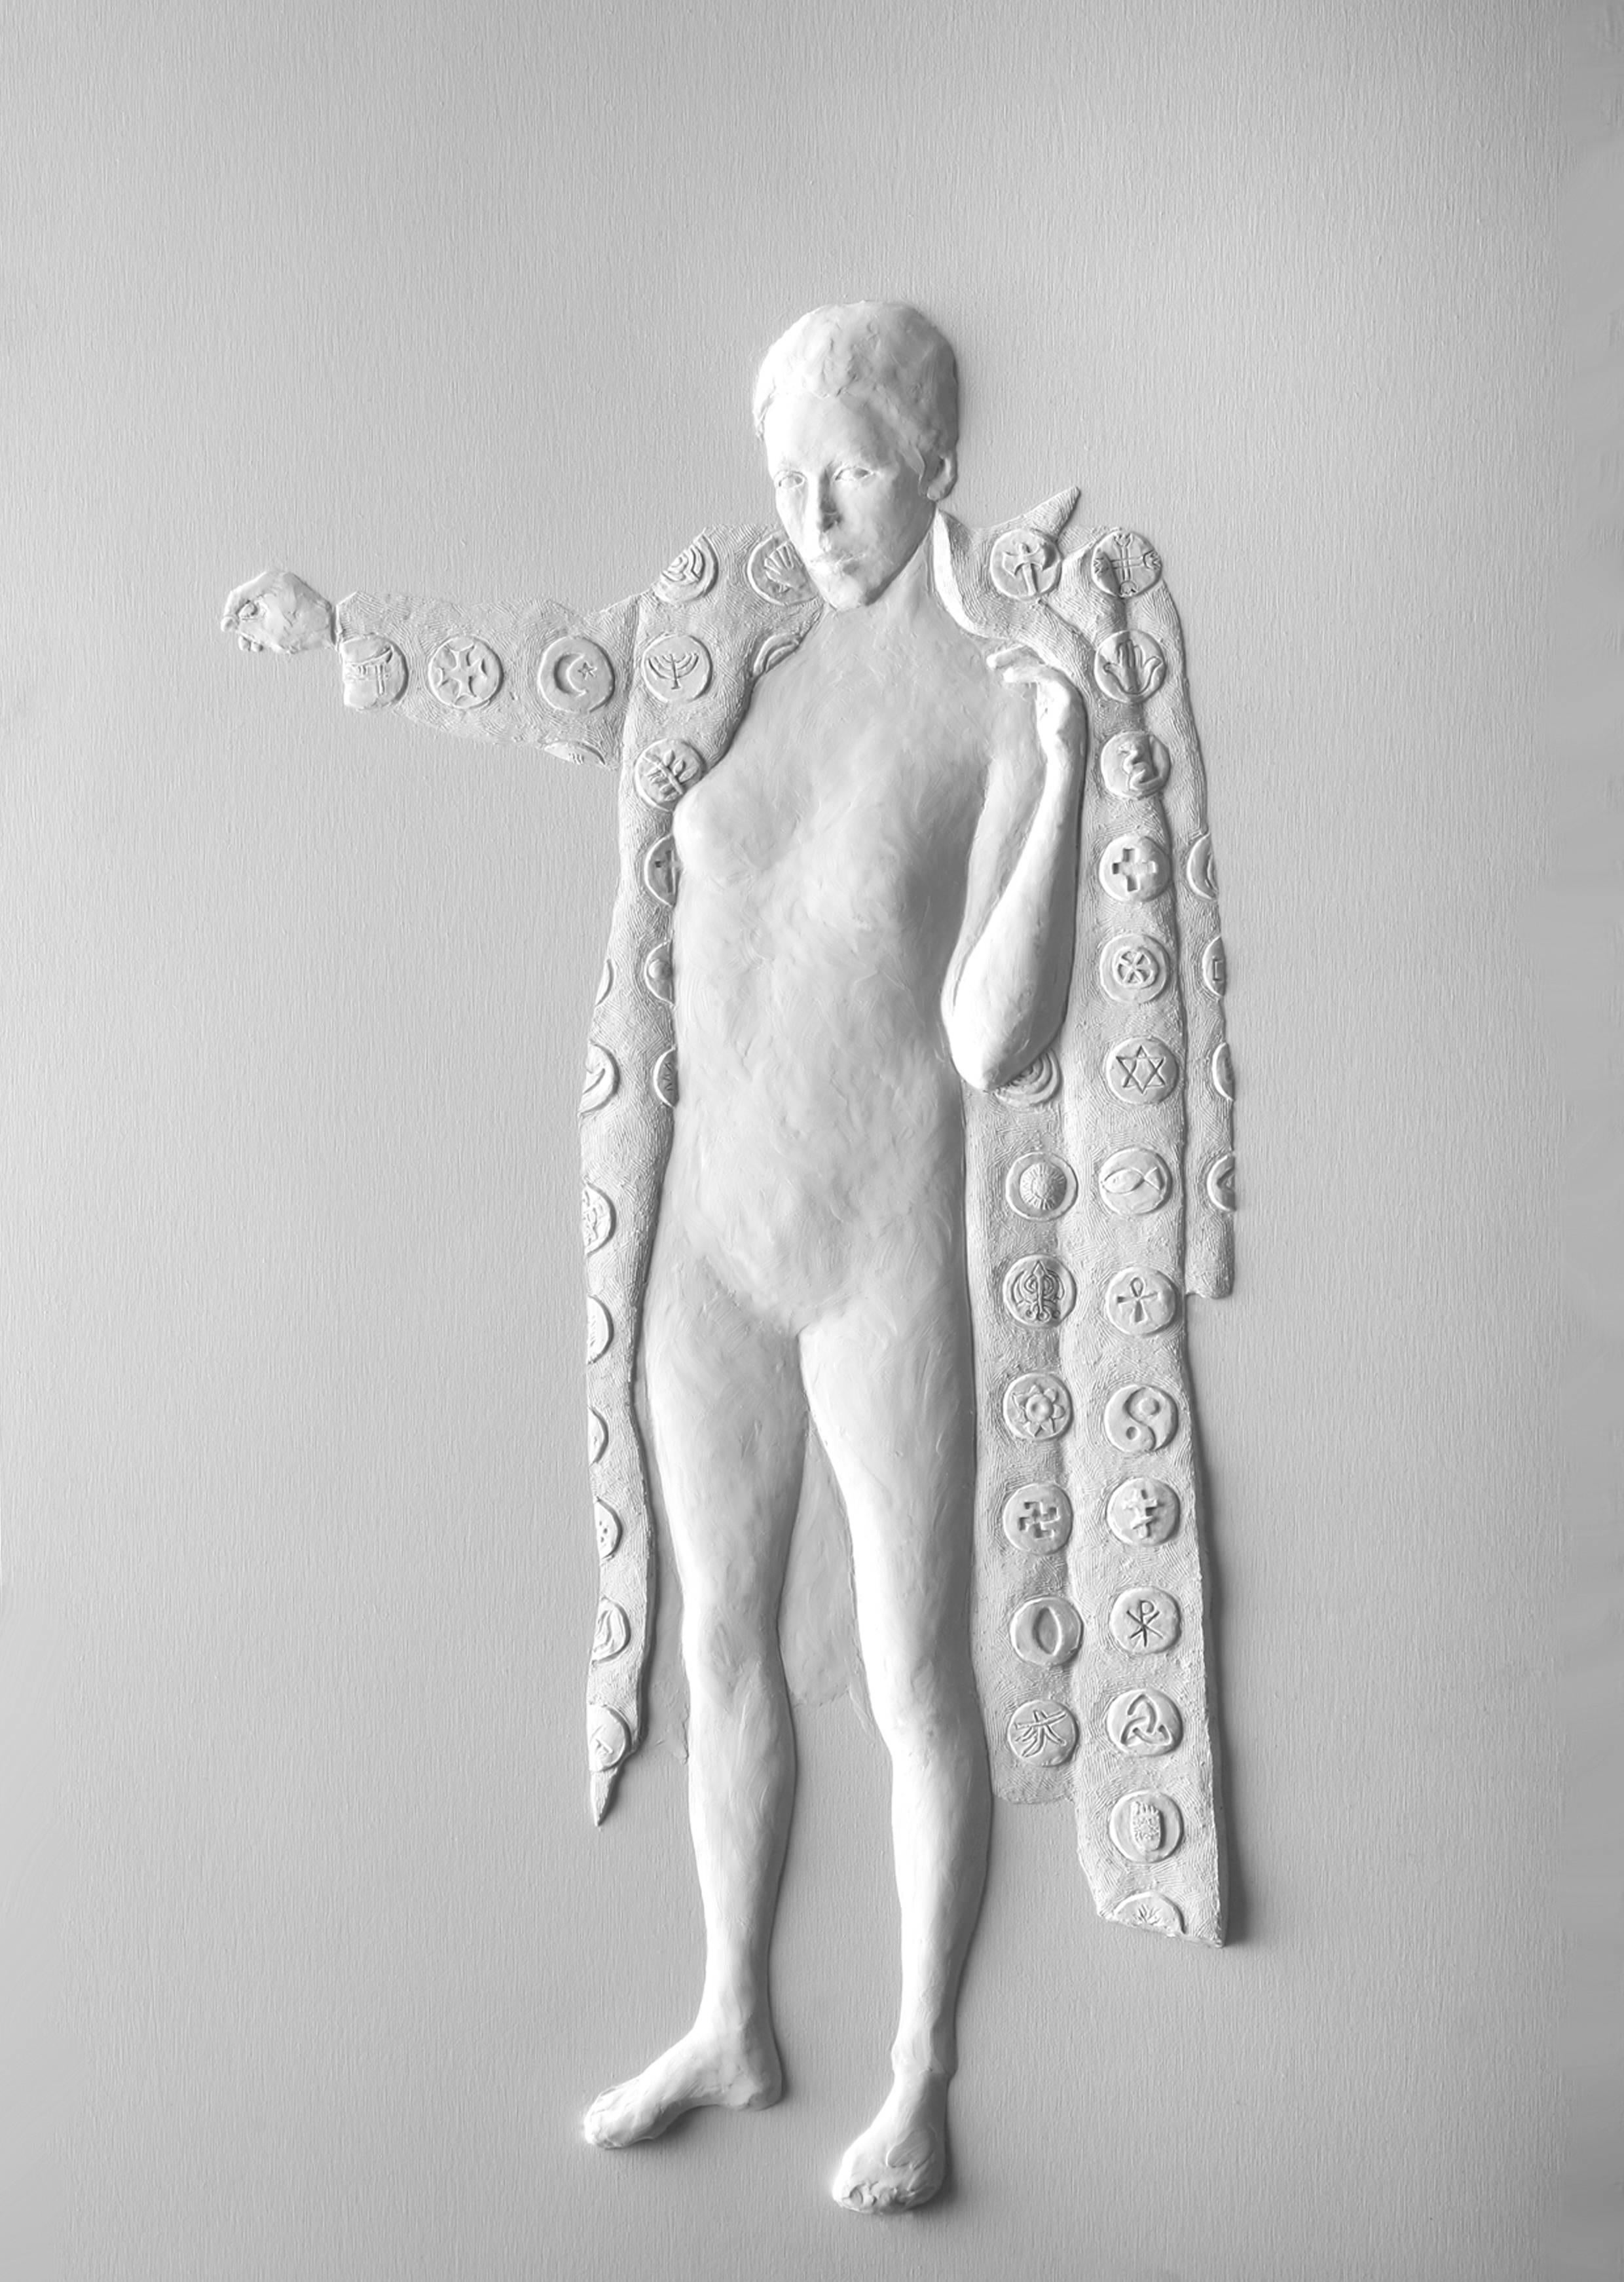 Maja Thommen Figurative Sculpture - "Symbol" Bas Relief Panel from the "Dressing" Series, 2011